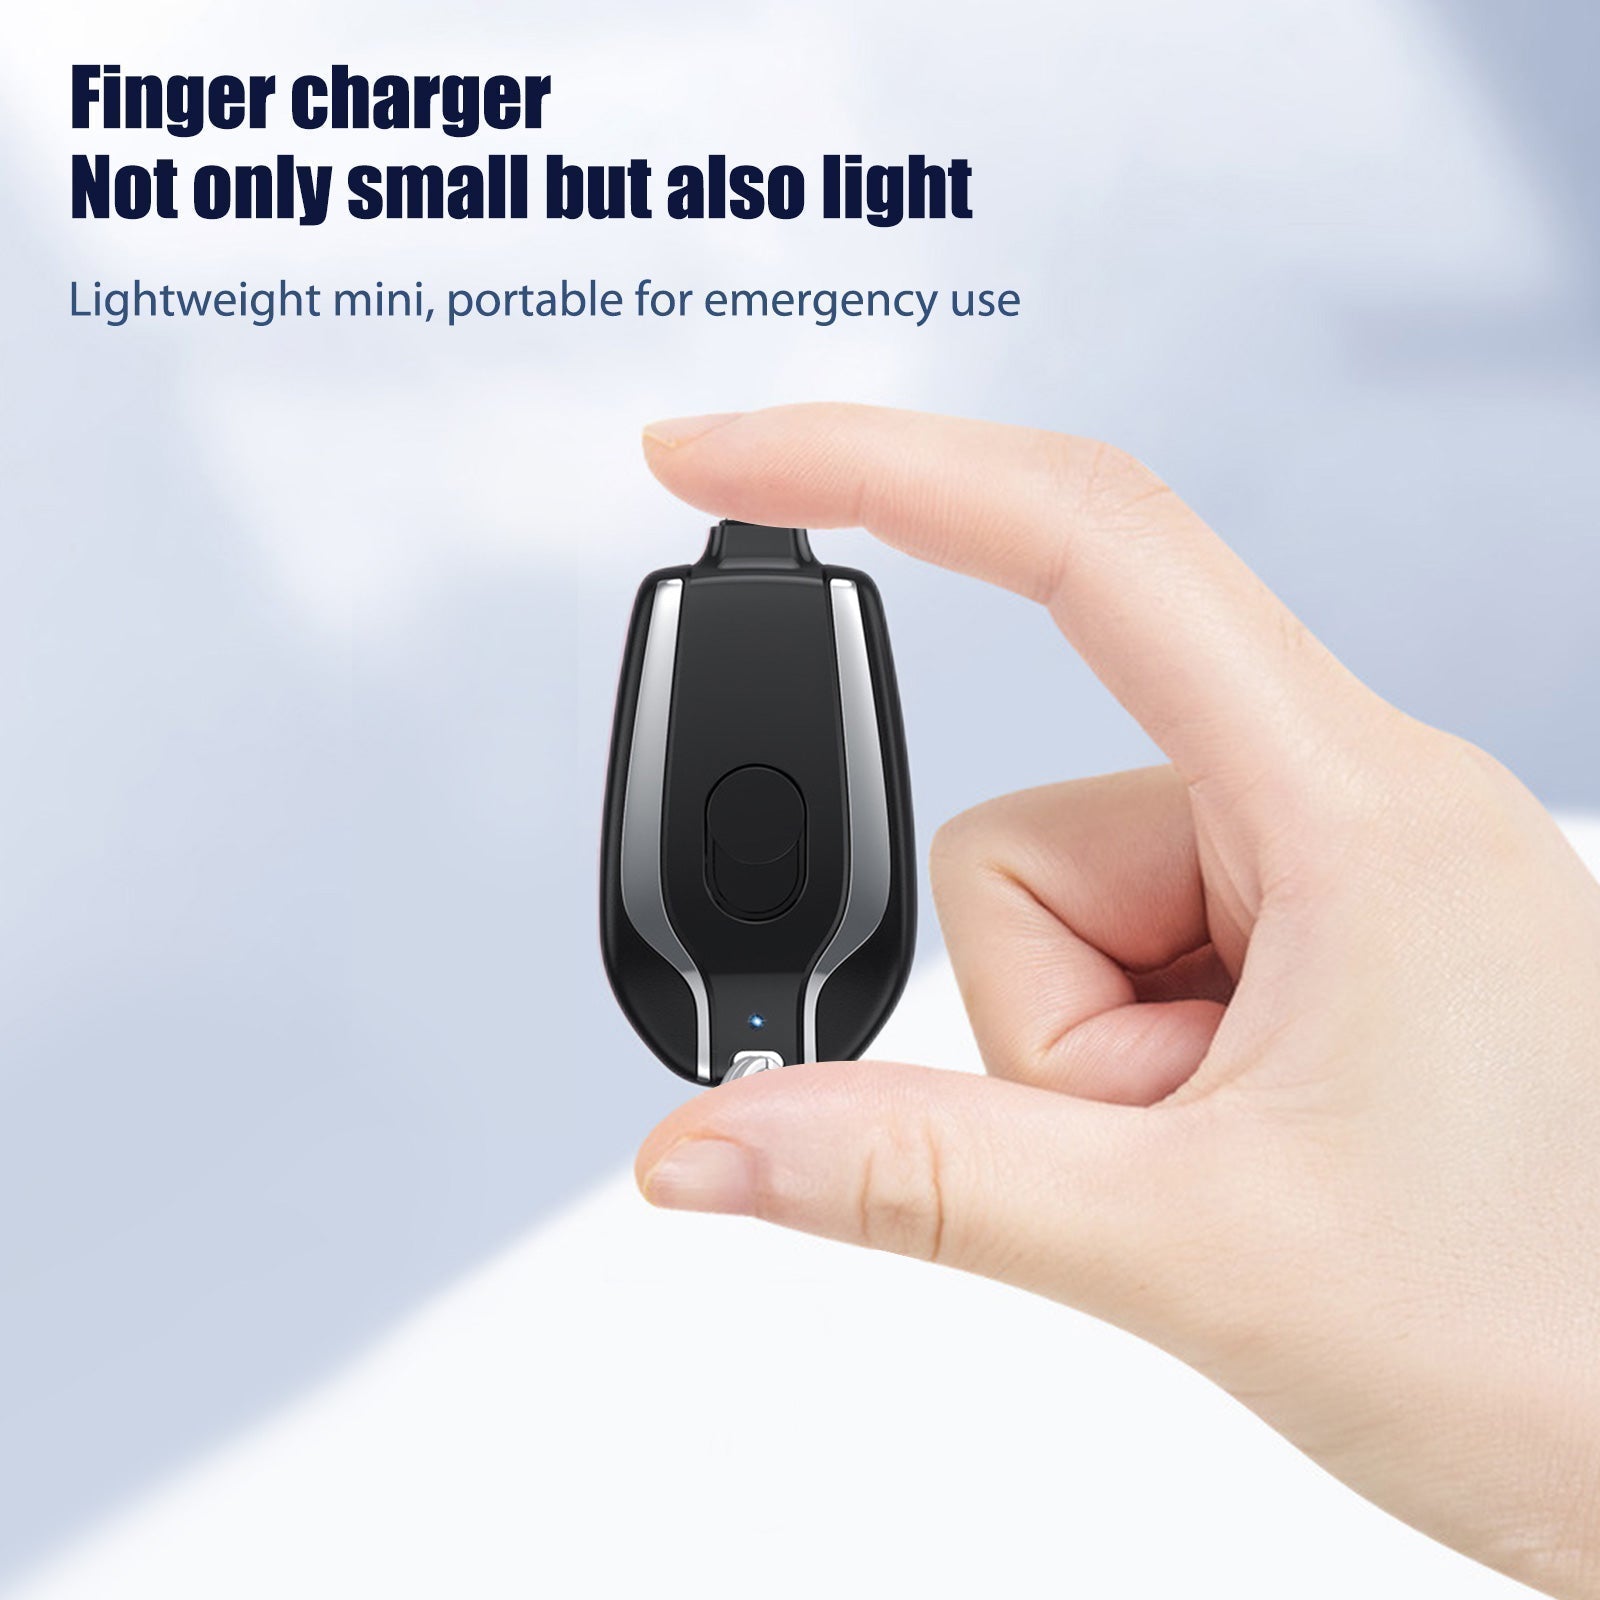 Mini Keychain Power Bank: Fast Charging Emergency Charger